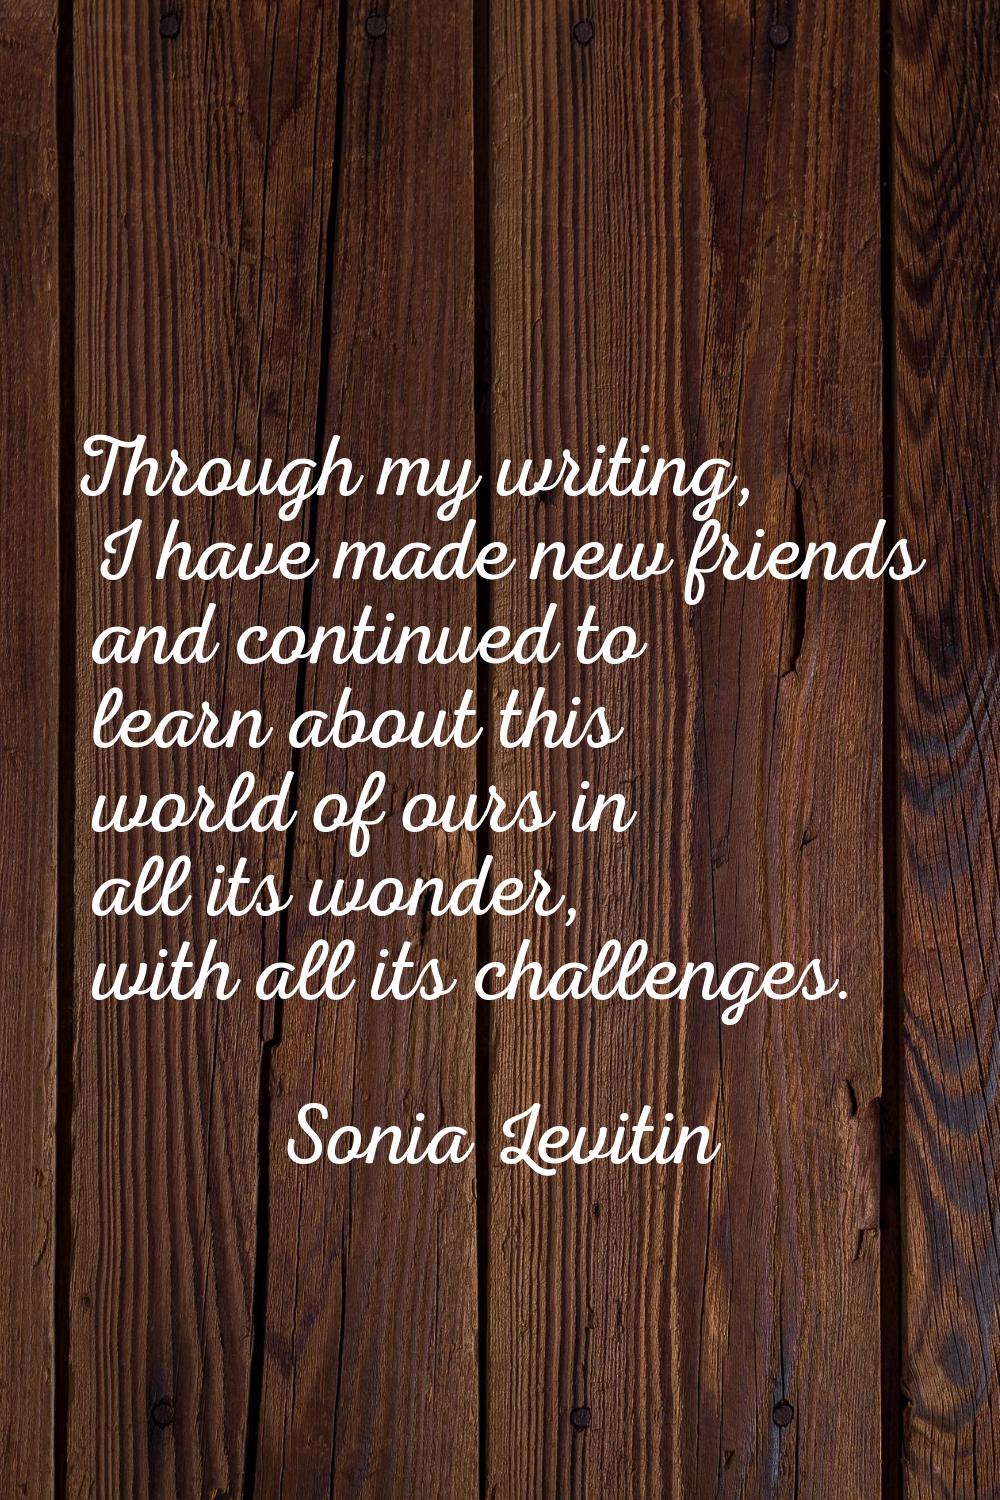 Through my writing, I have made new friends and continued to learn about this world of ours in all 